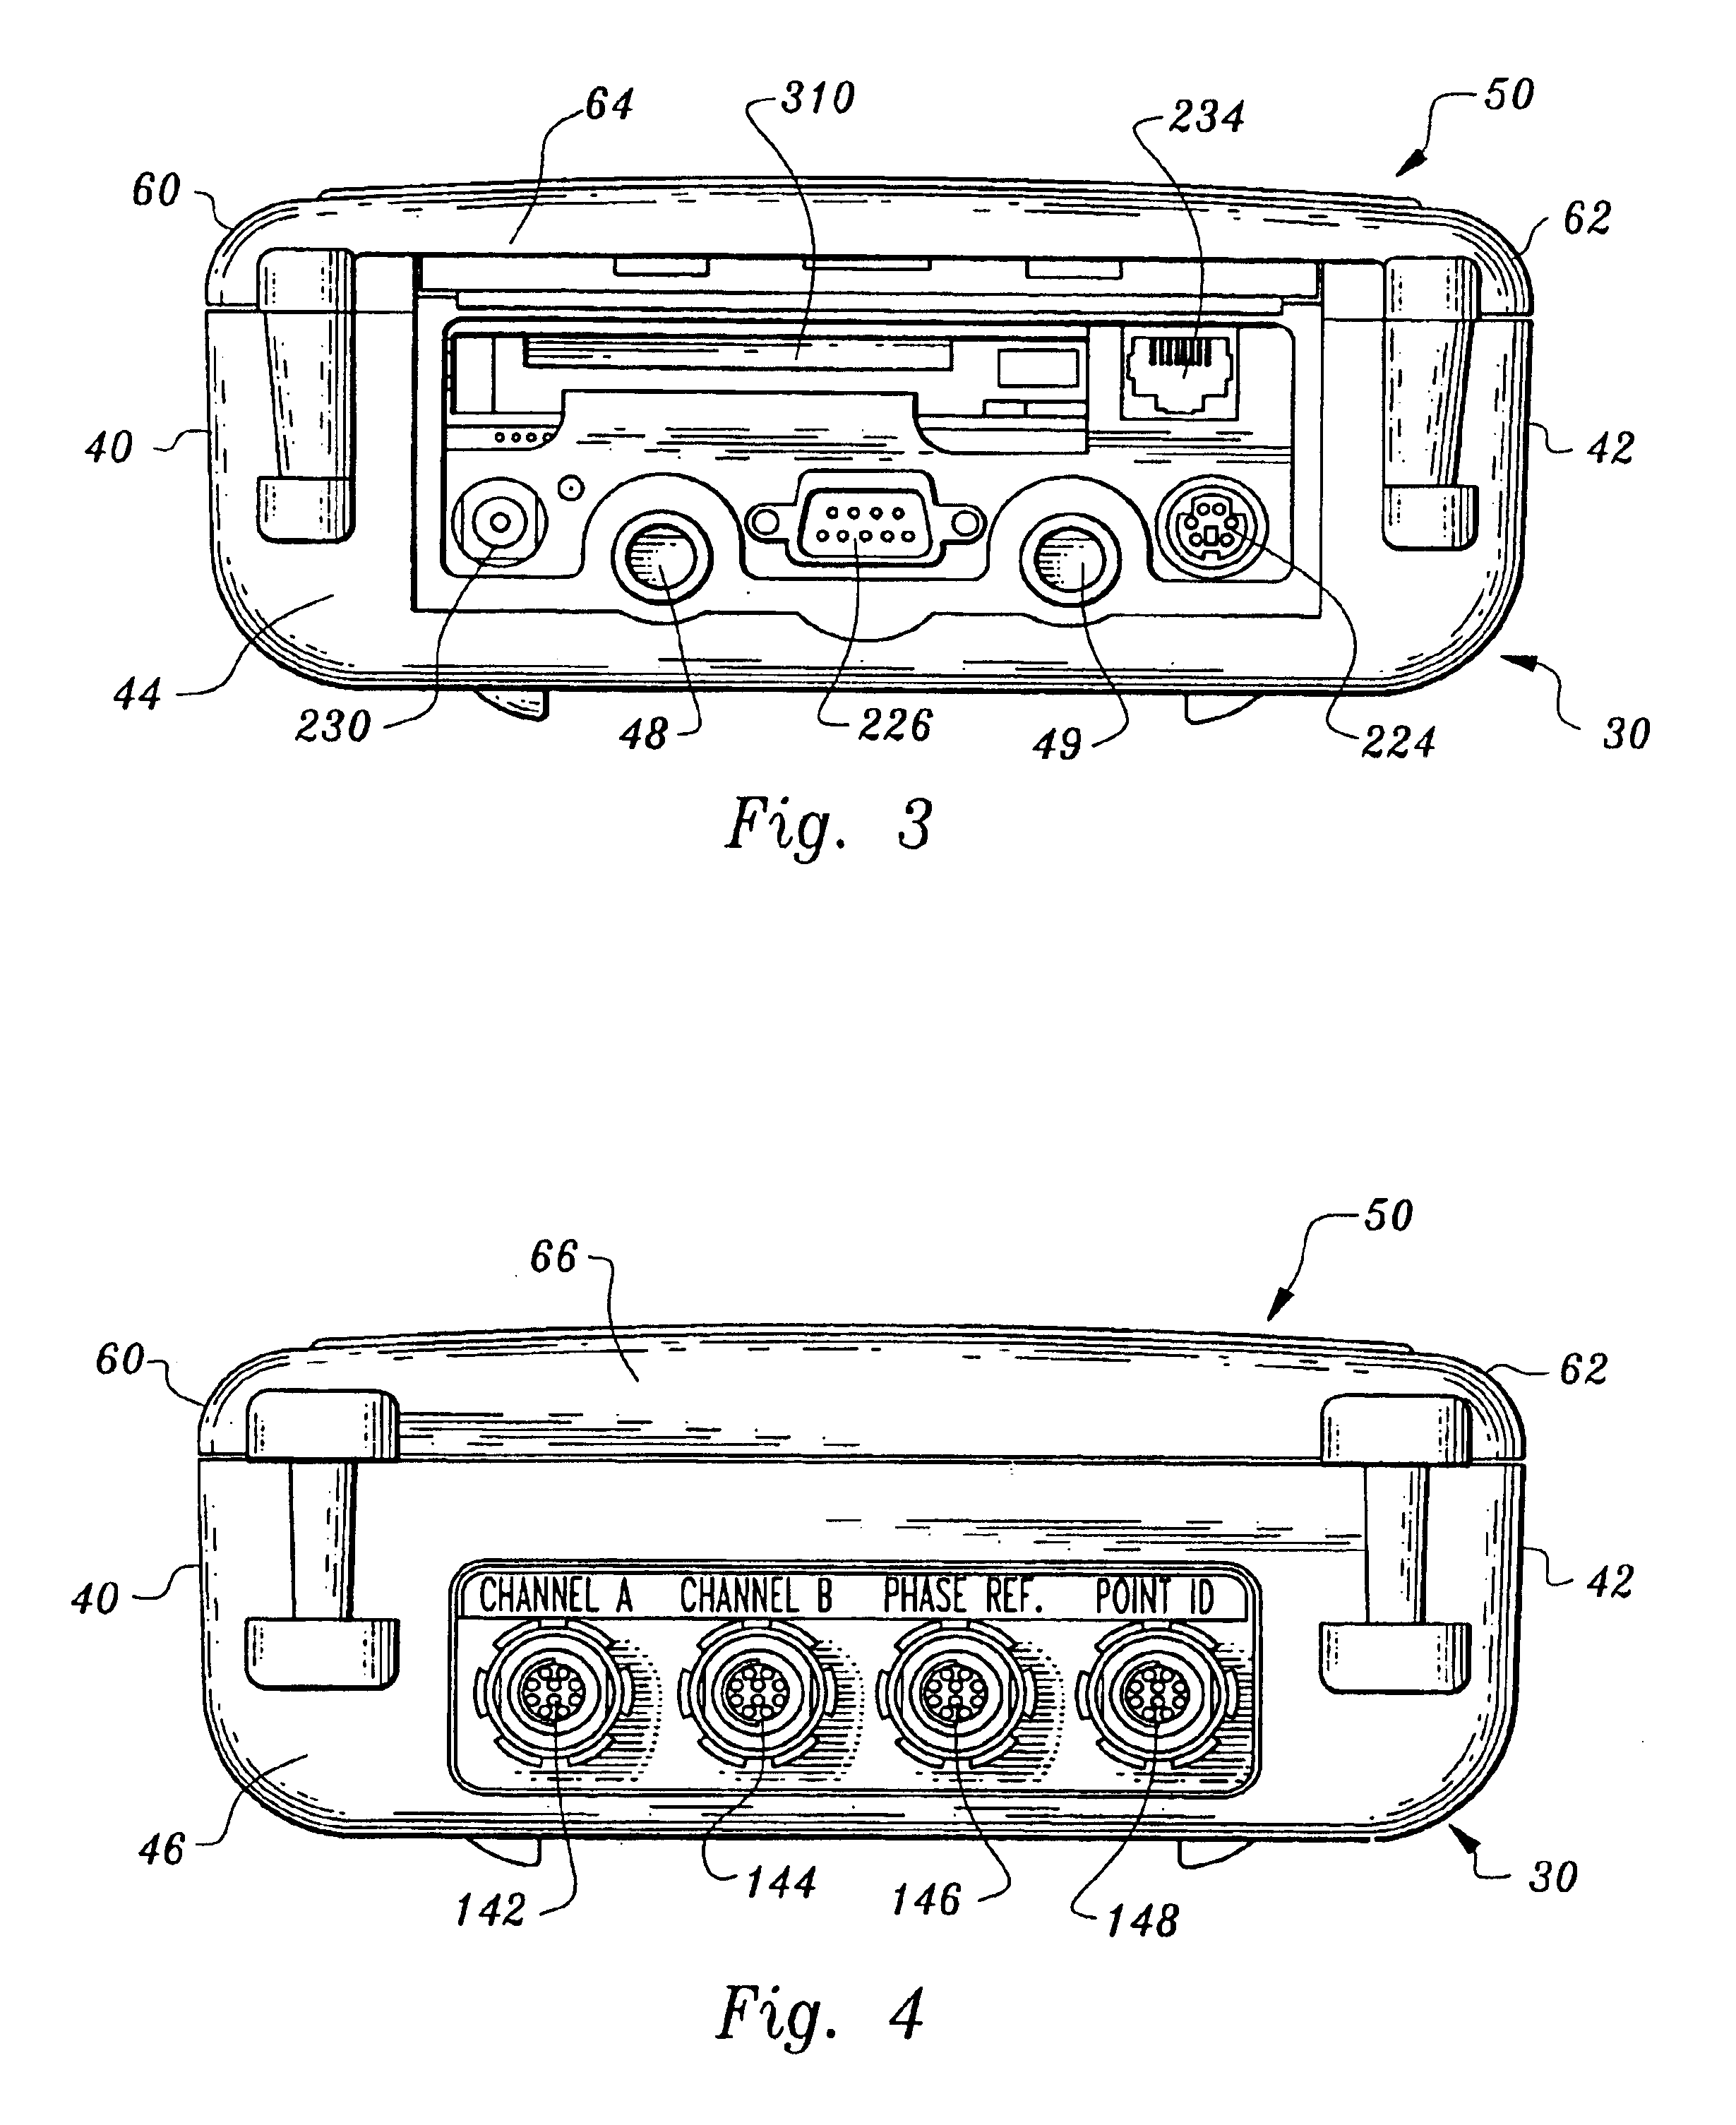 Portable data collector and analyzer: apparatus and method